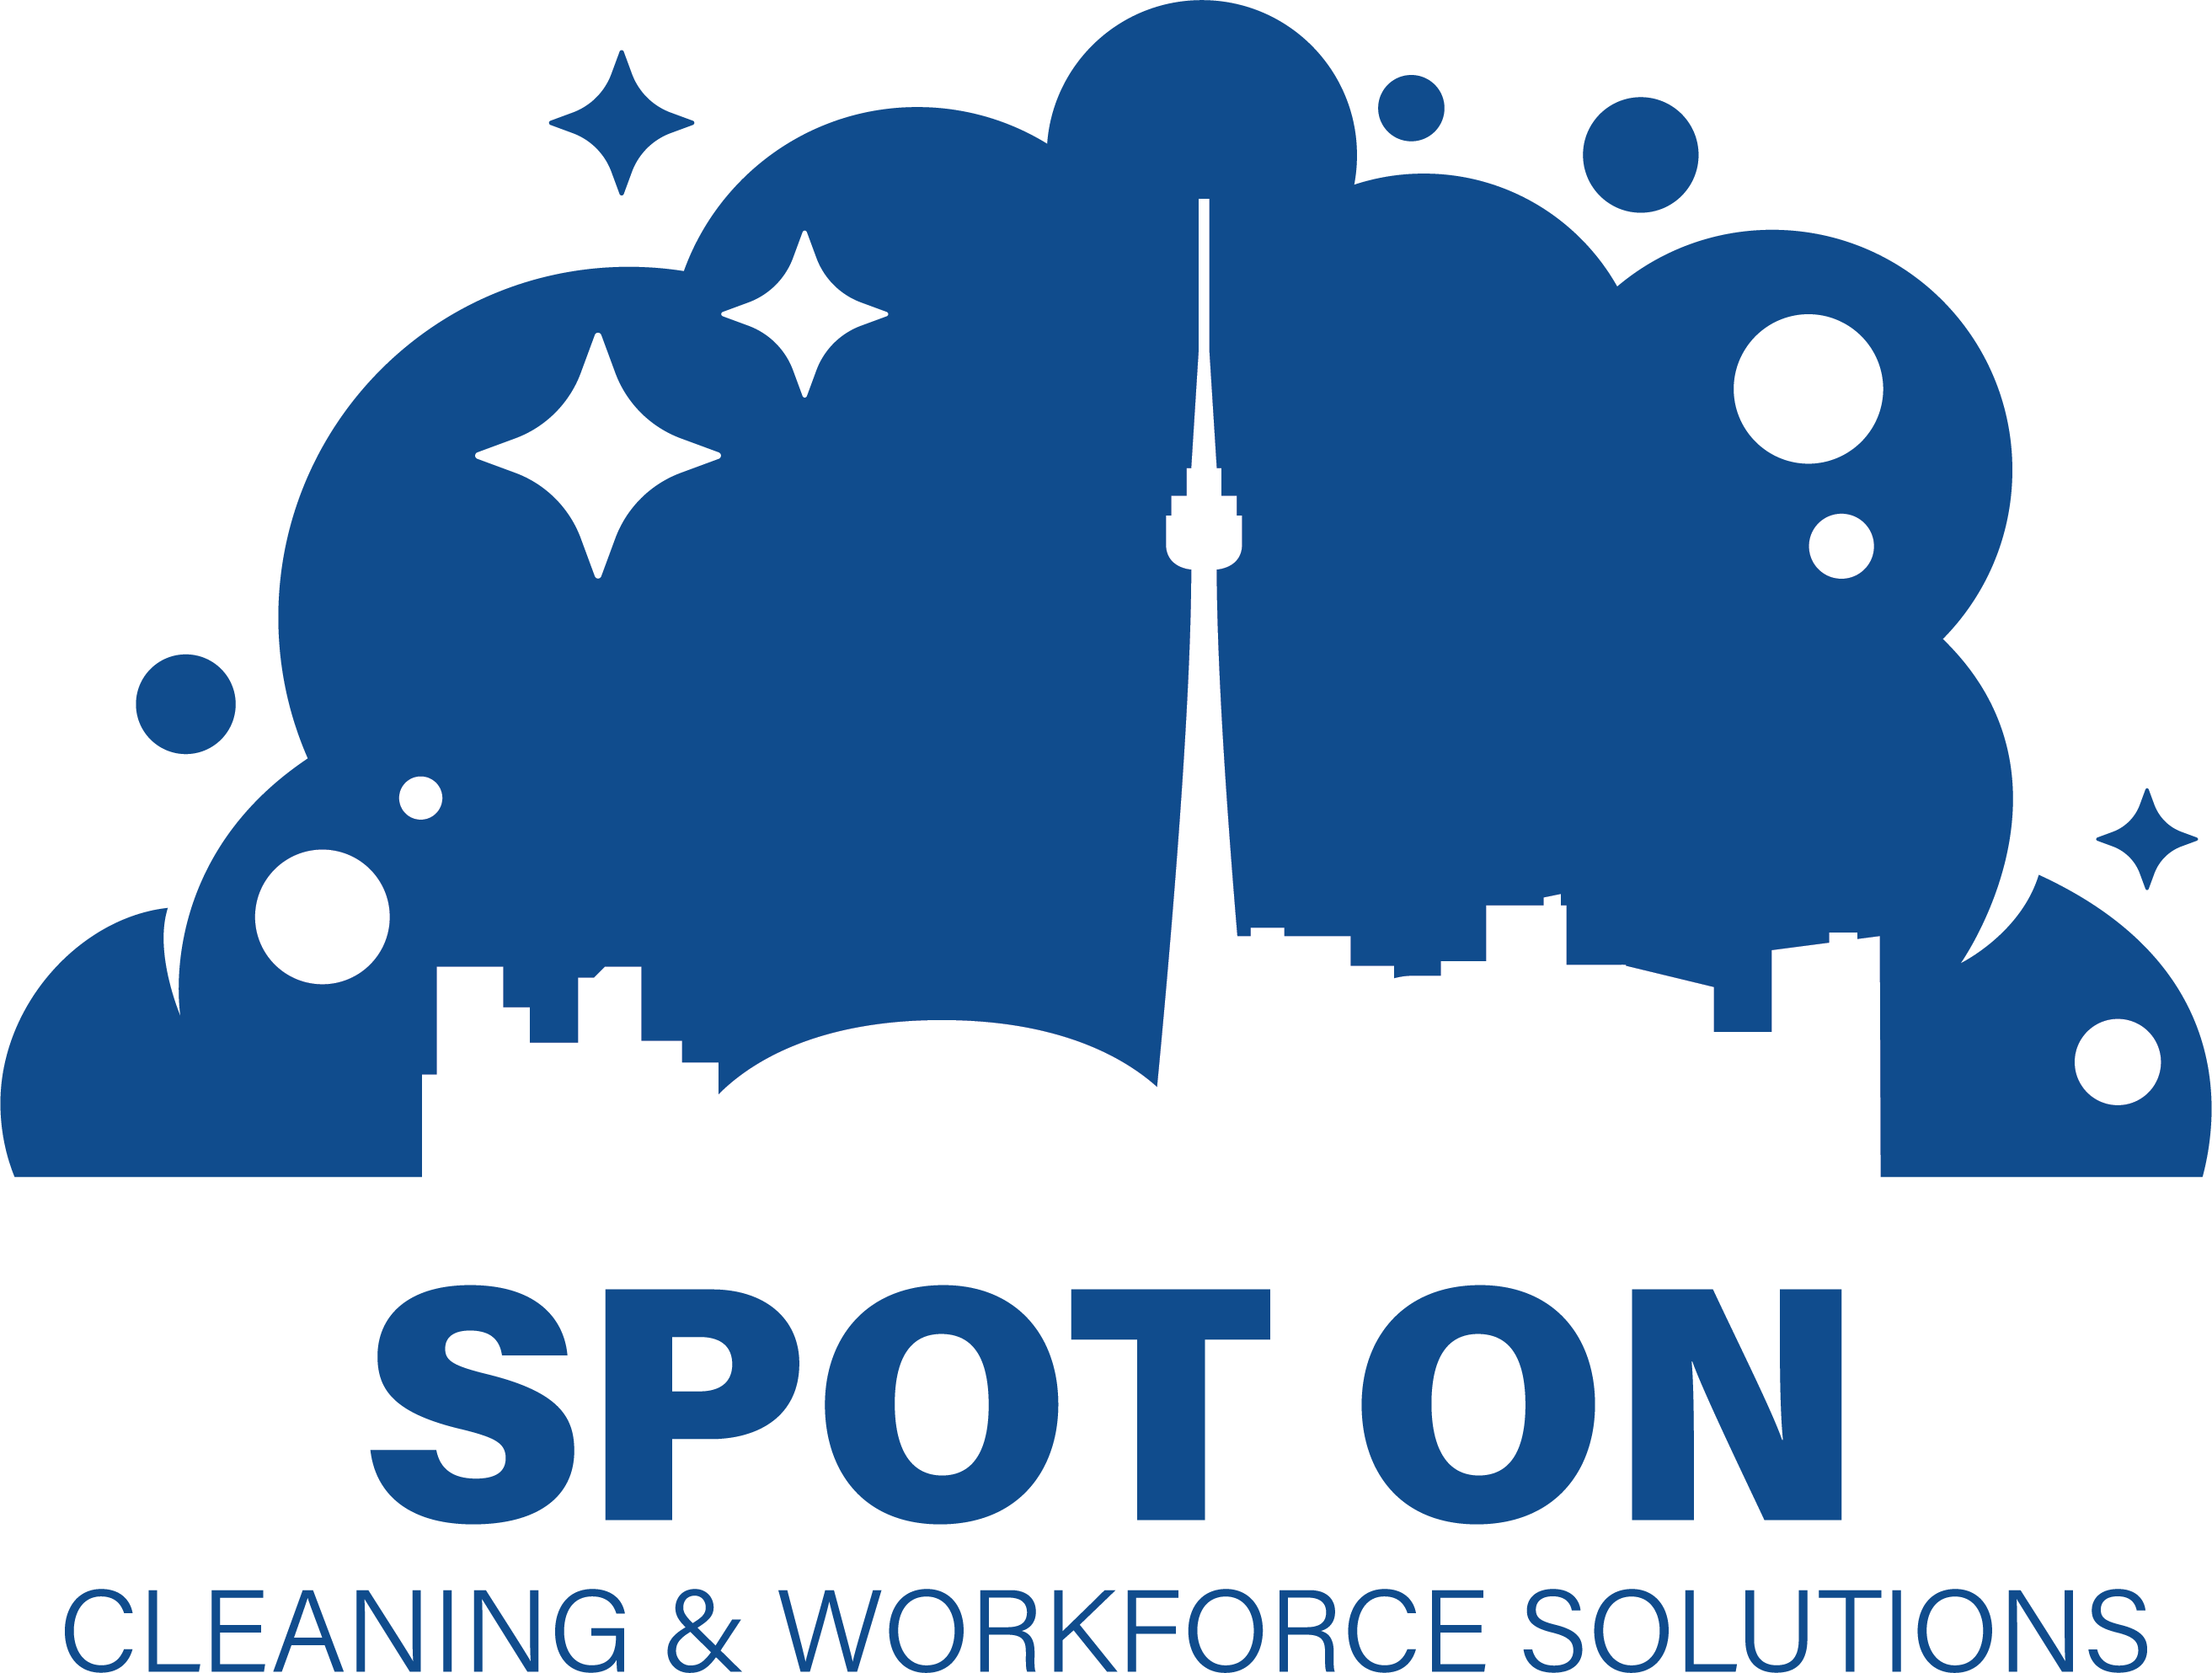 Spot On Cleaning & Workforce Solutions